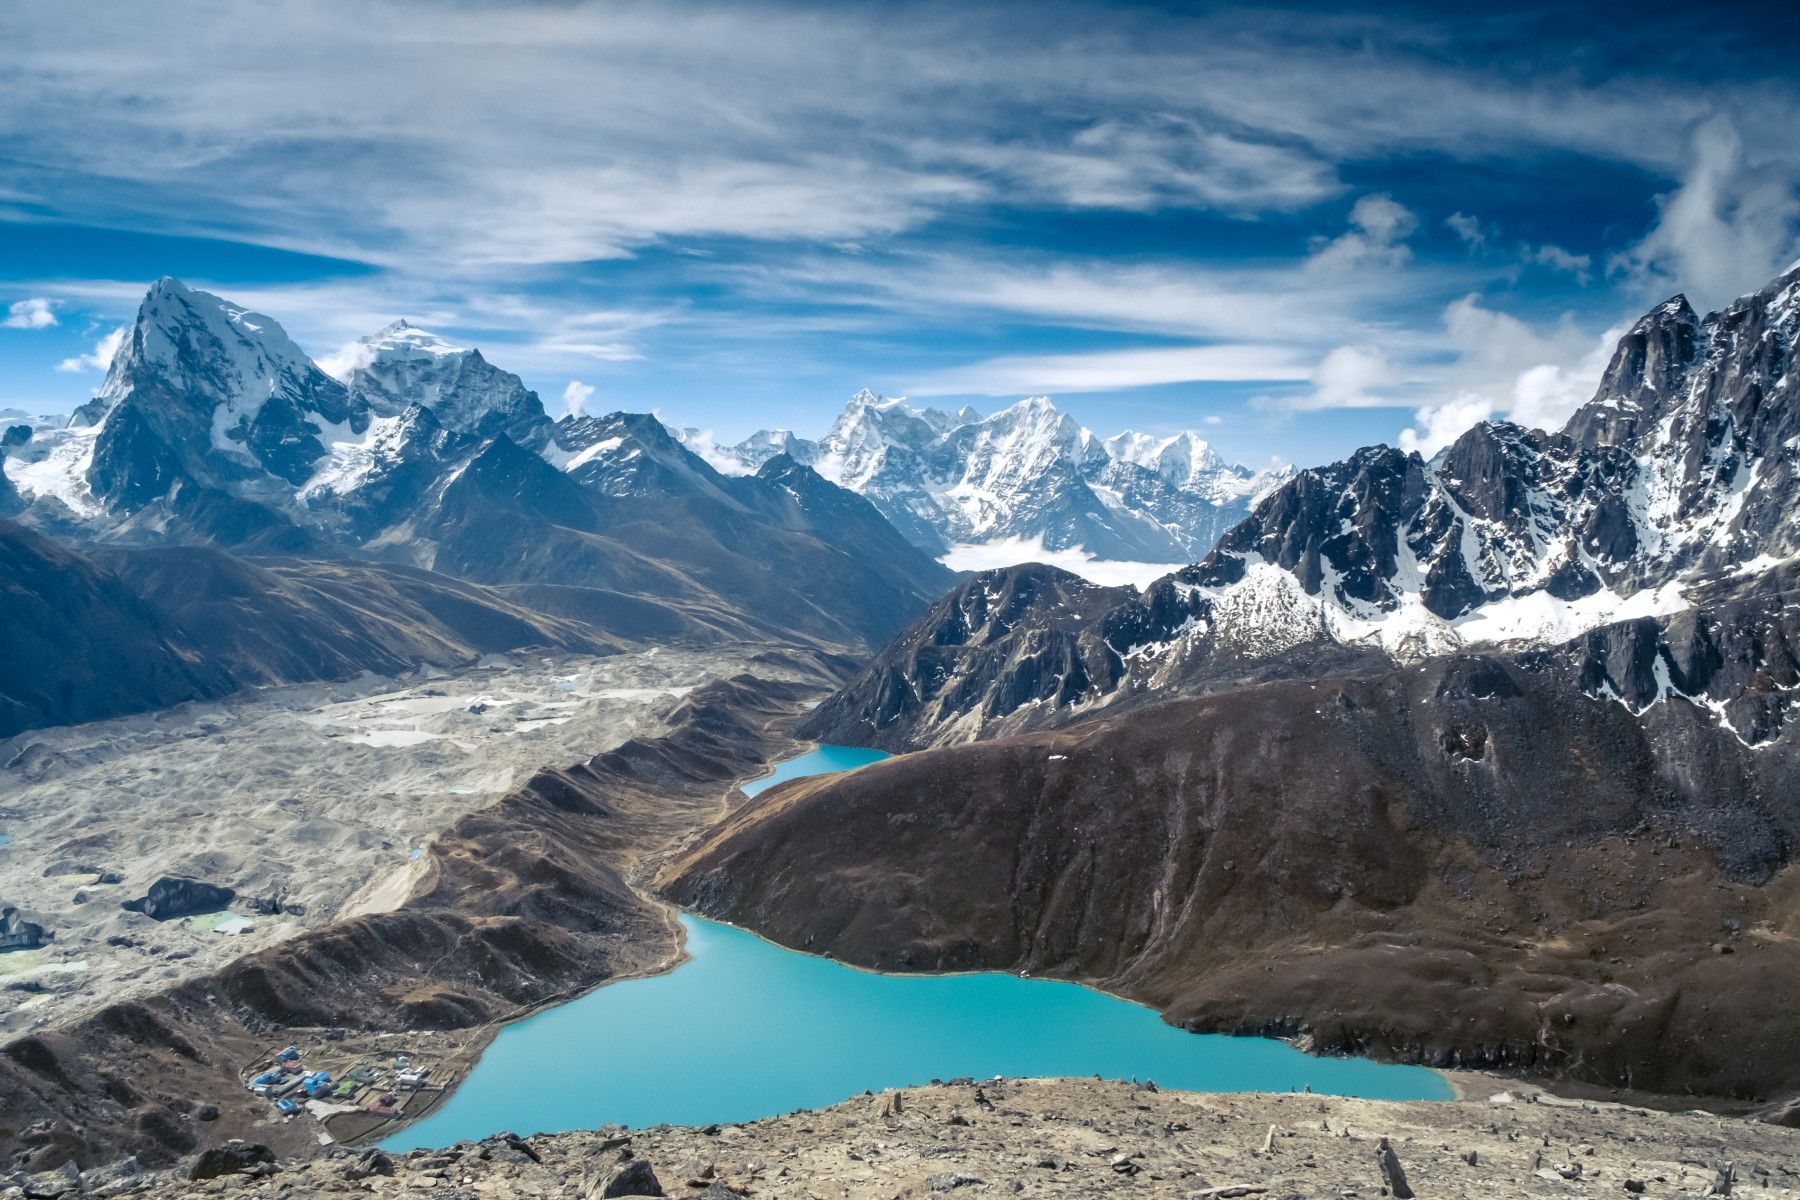 Gokyo Lakes, a popular trekking destination in the Nepal Himalayas. Photo: Getty.